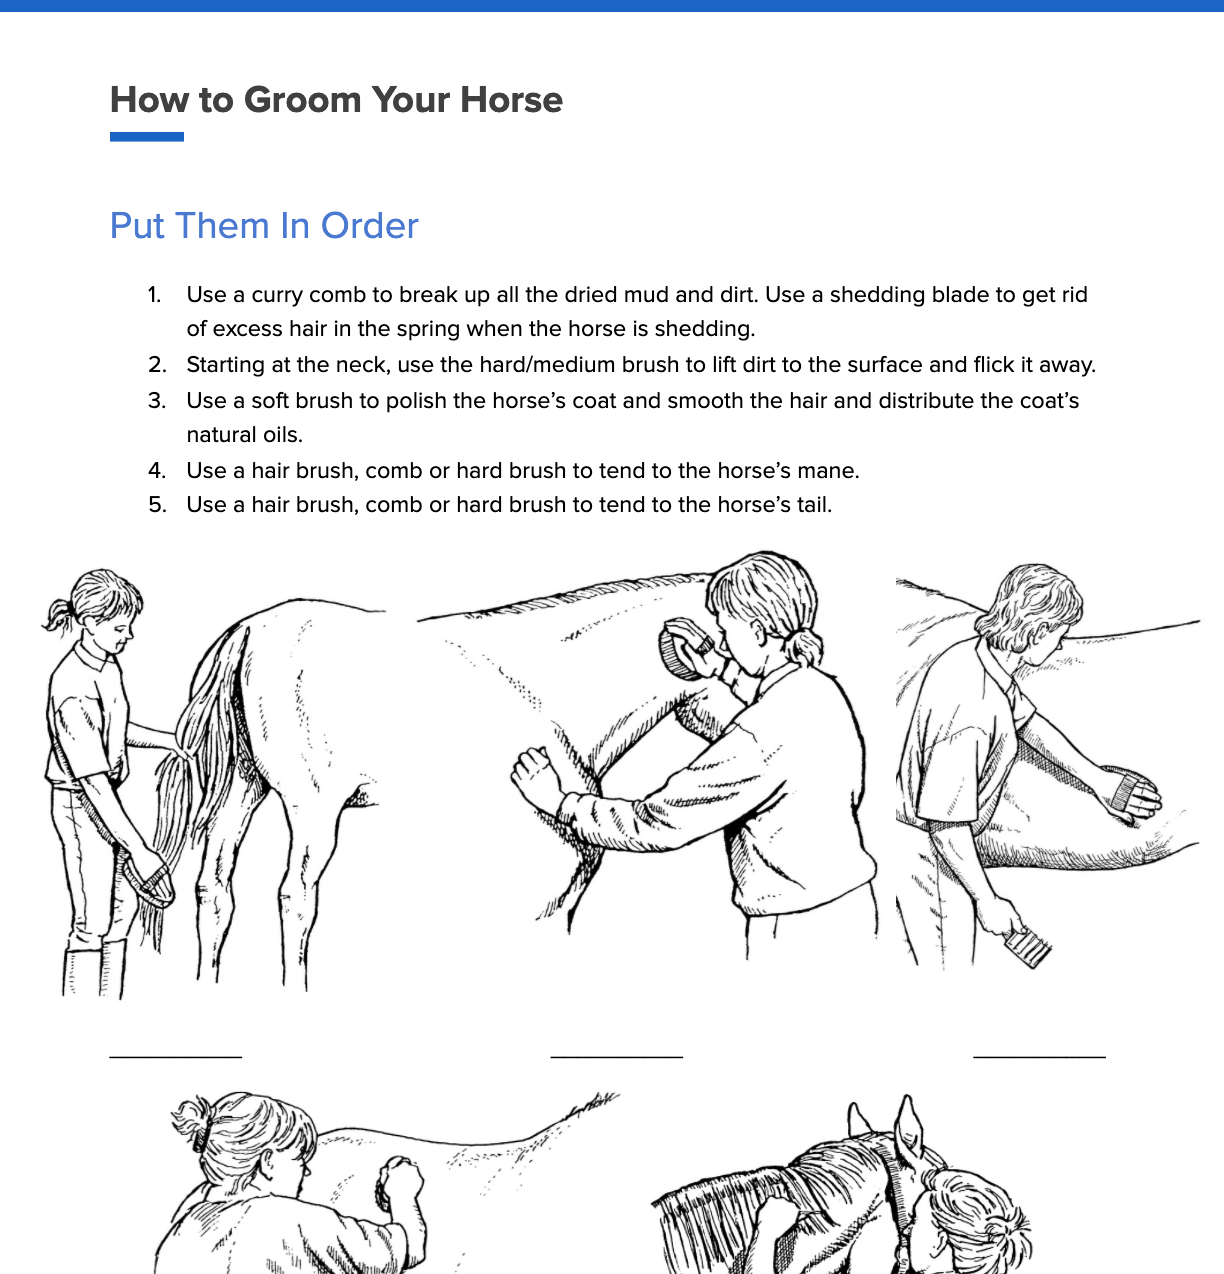 Worksheet – How to Groom Your Horse